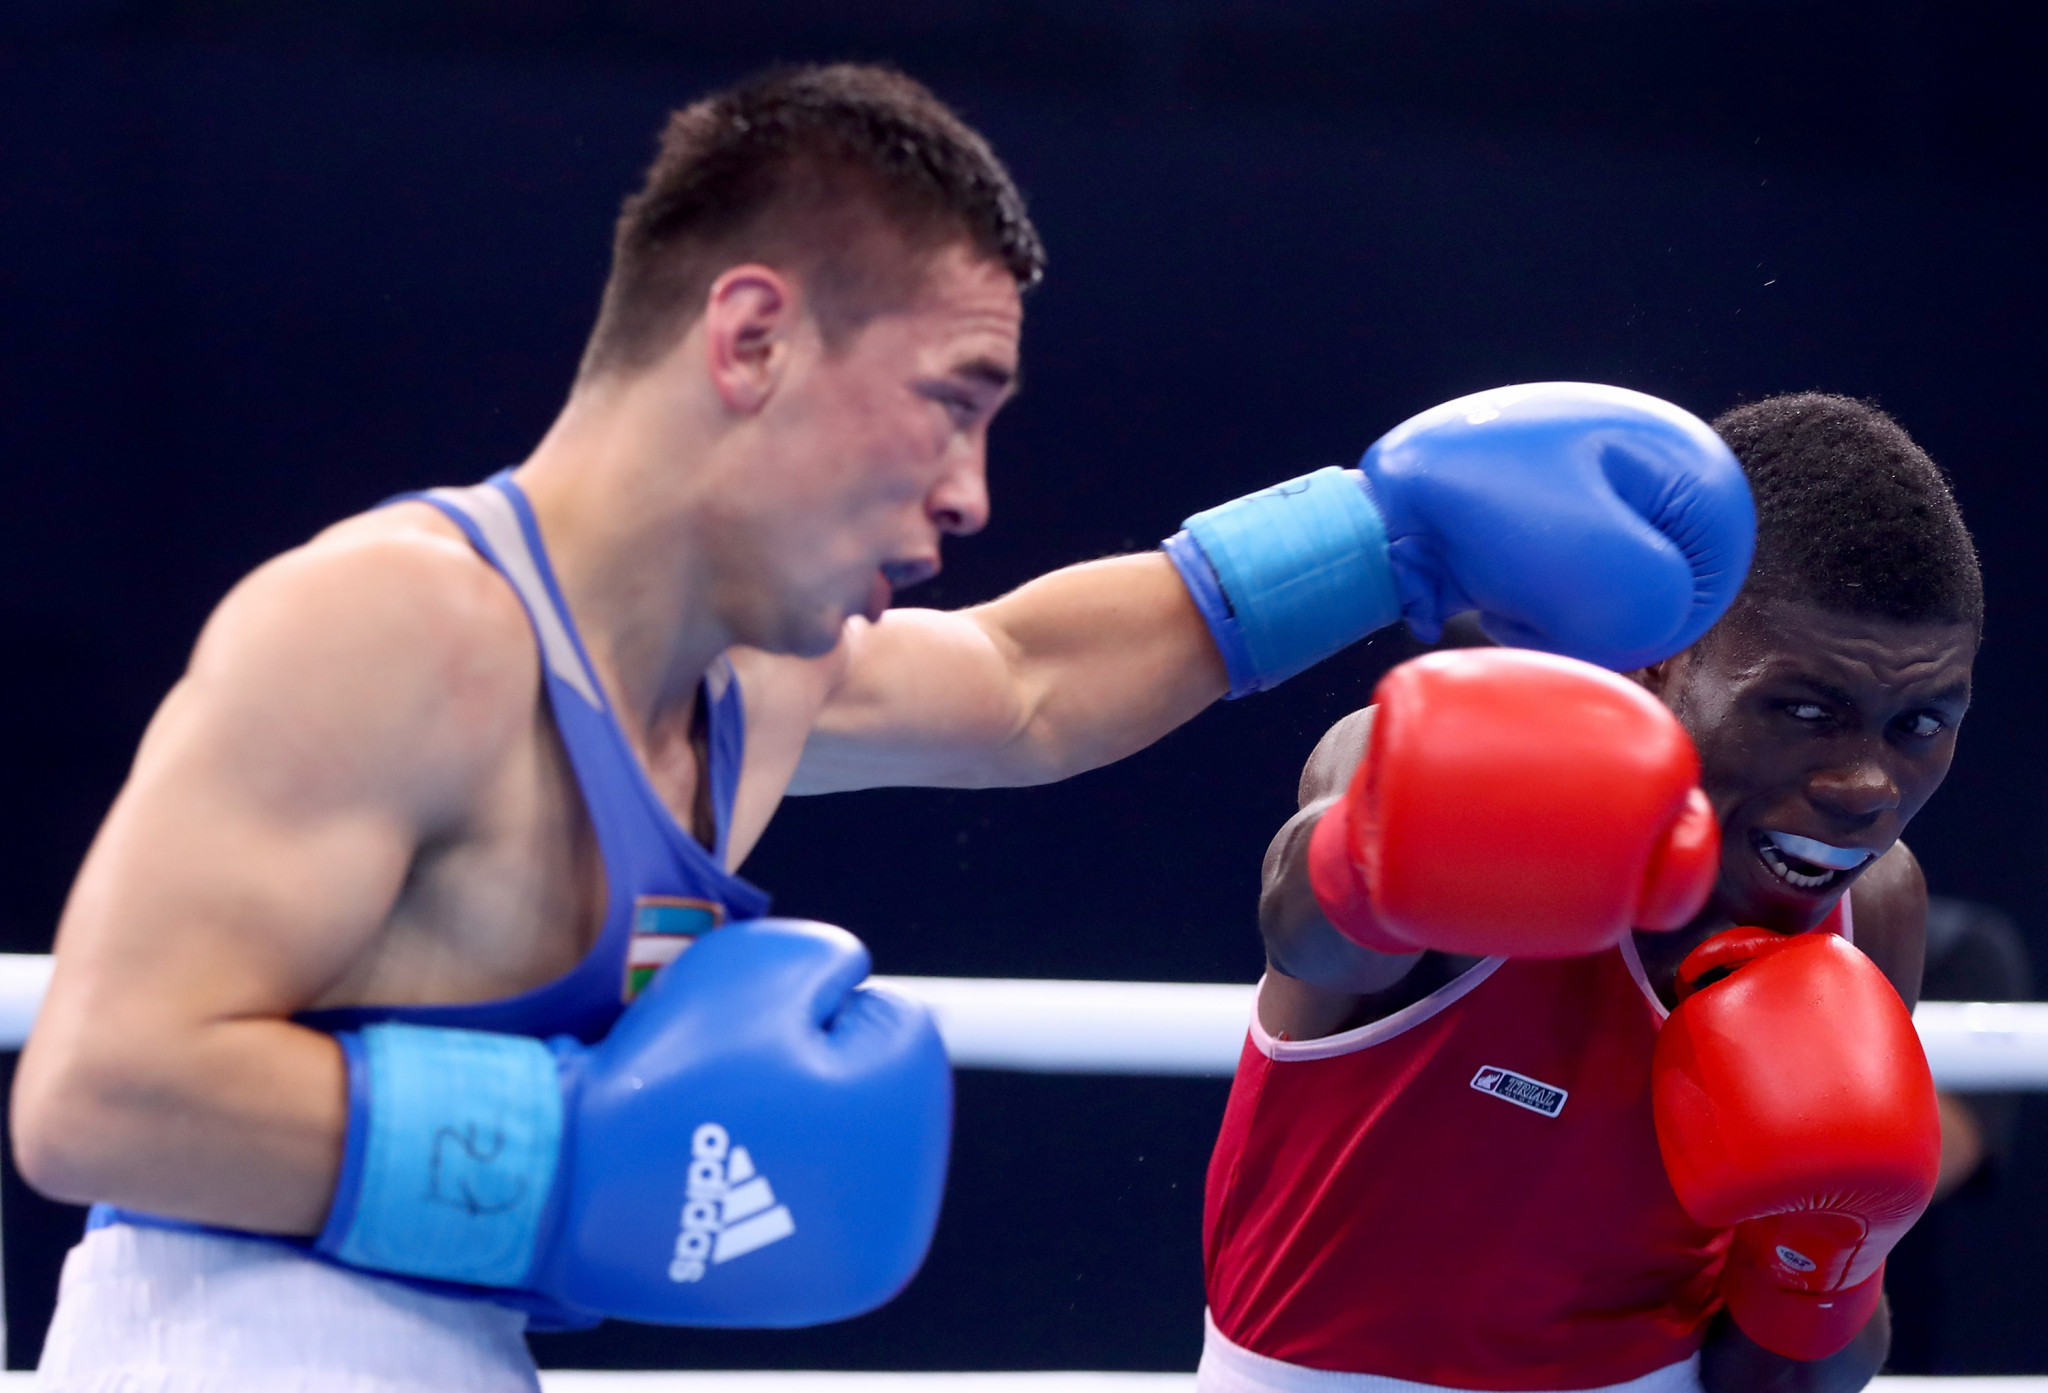 Reigning 49kg Olympic champion, Hasanboy Dusmatov of Uzbekistan, is expected to compete in Yekaterinburg ©Getty Images